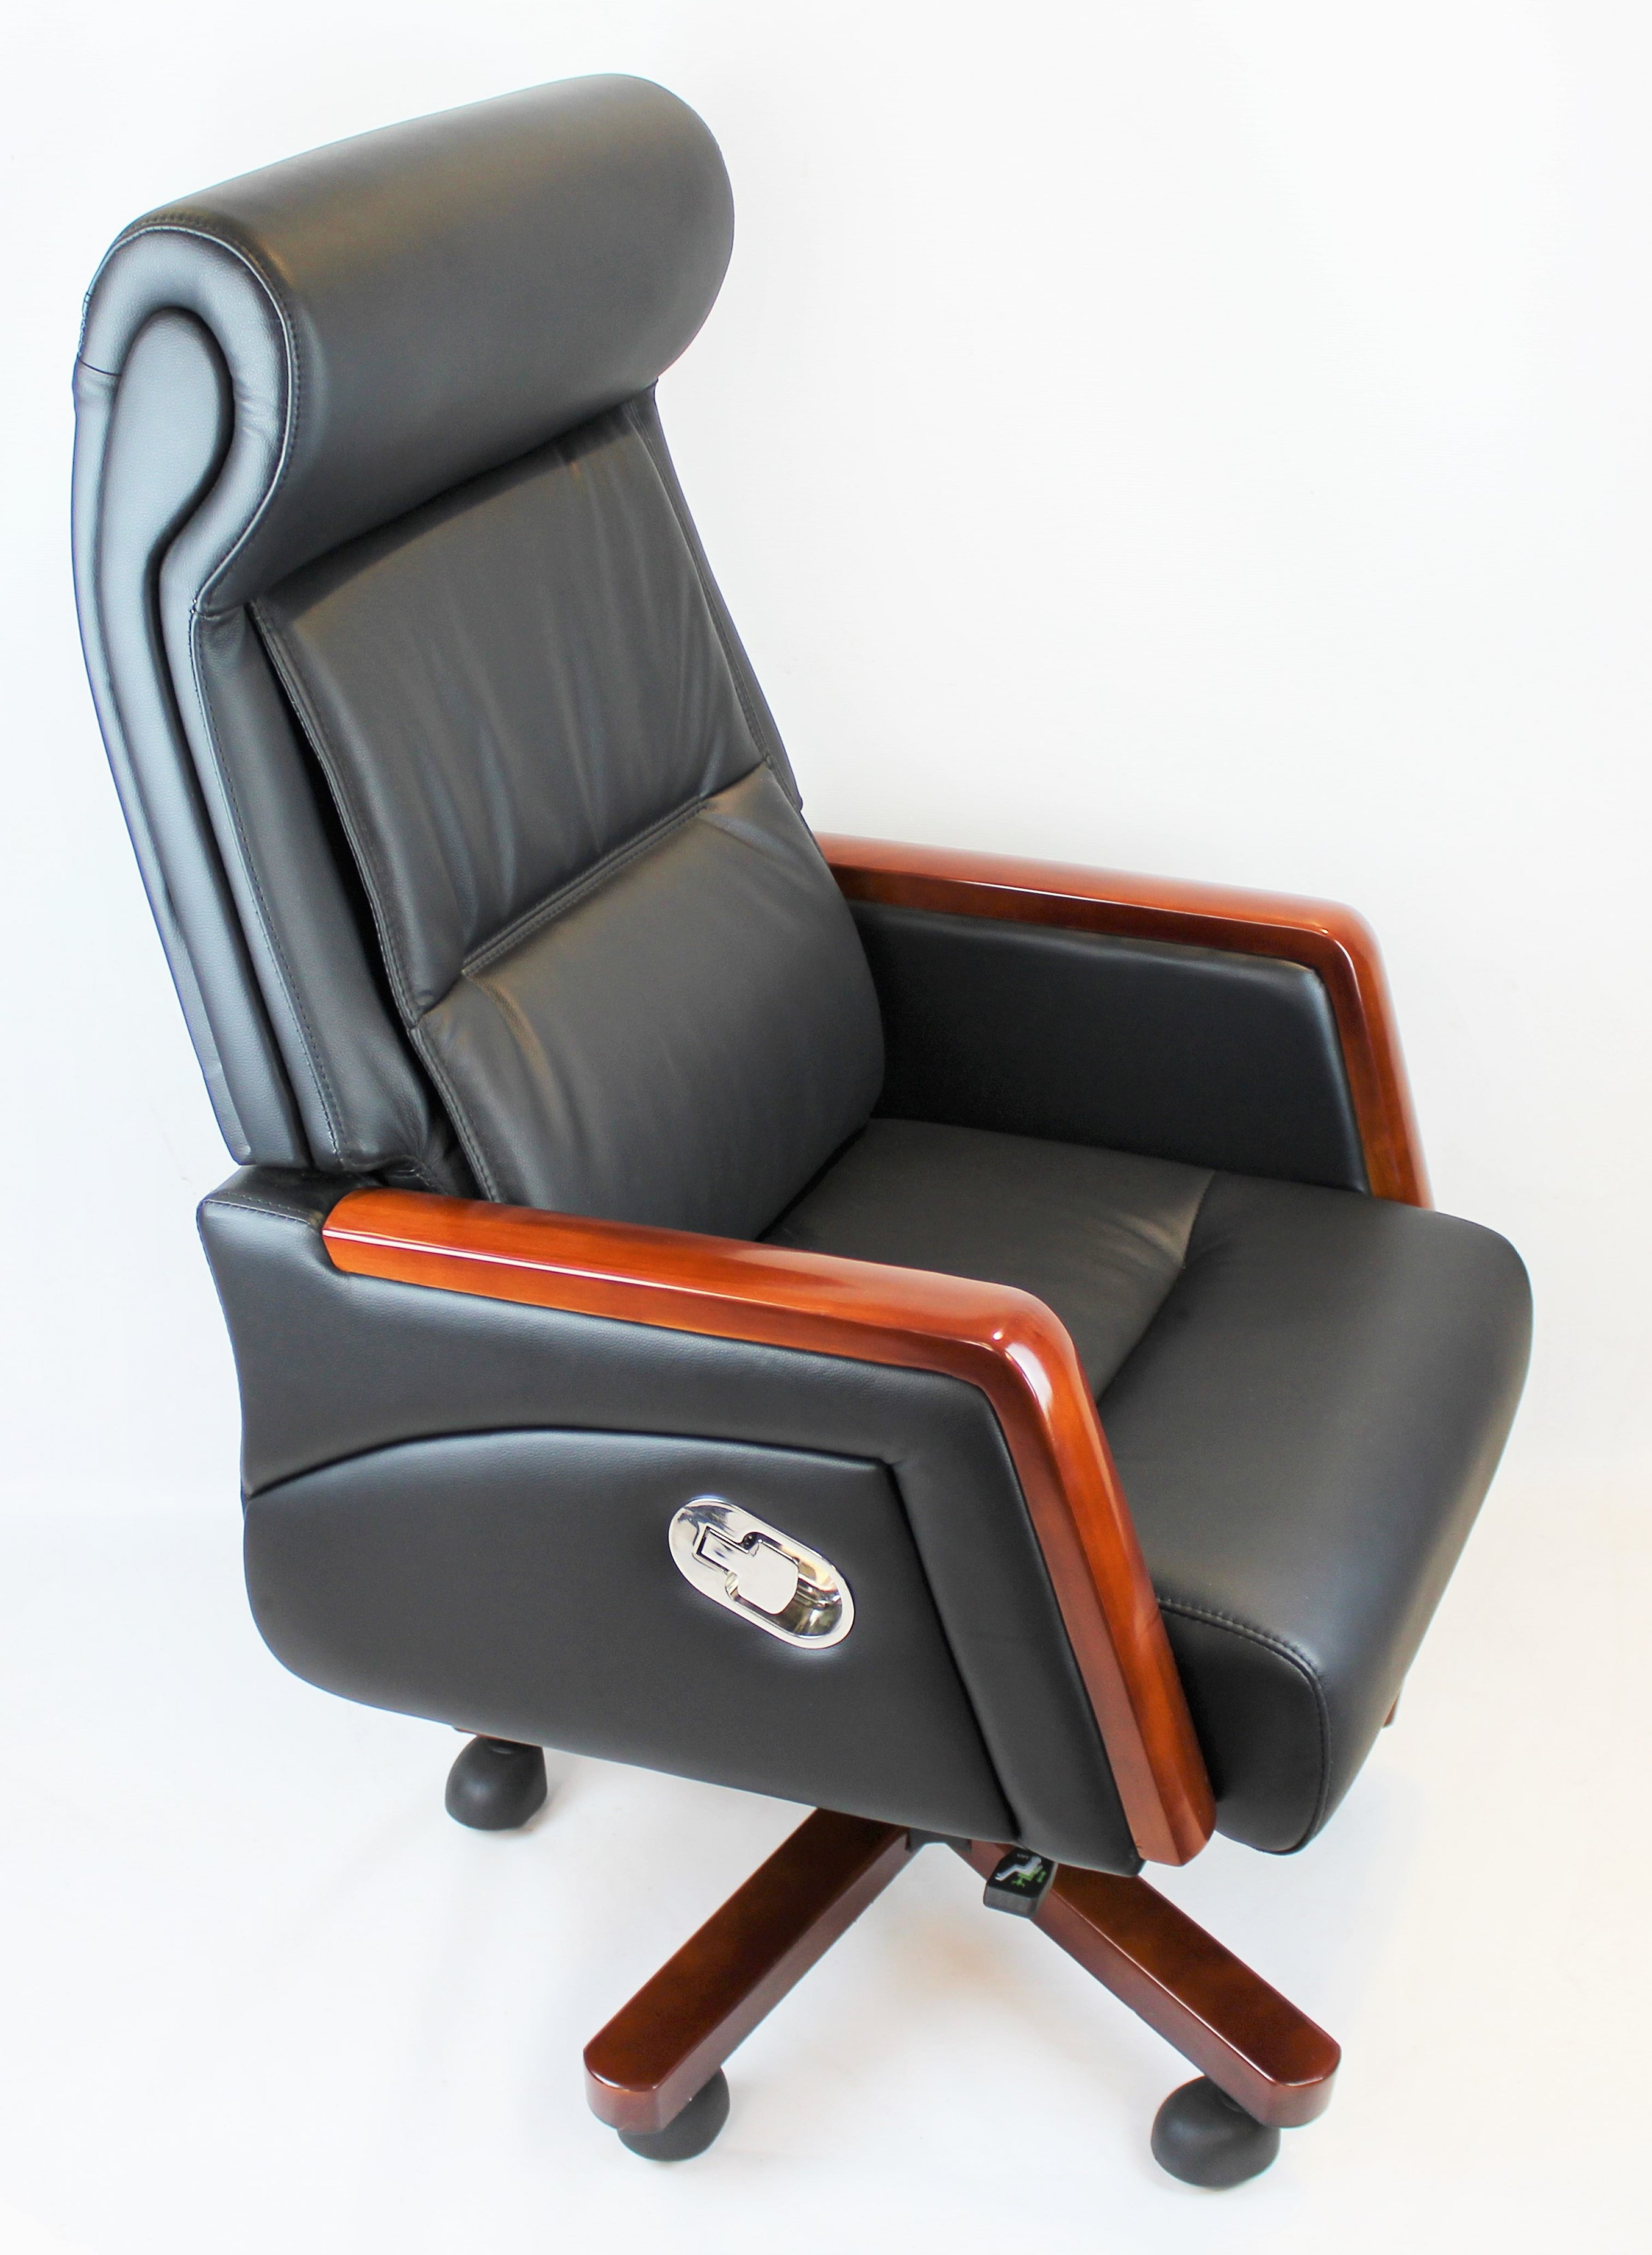 Reclining Black Leather Executive Office Chair with Wooden Arms - SZ-A109